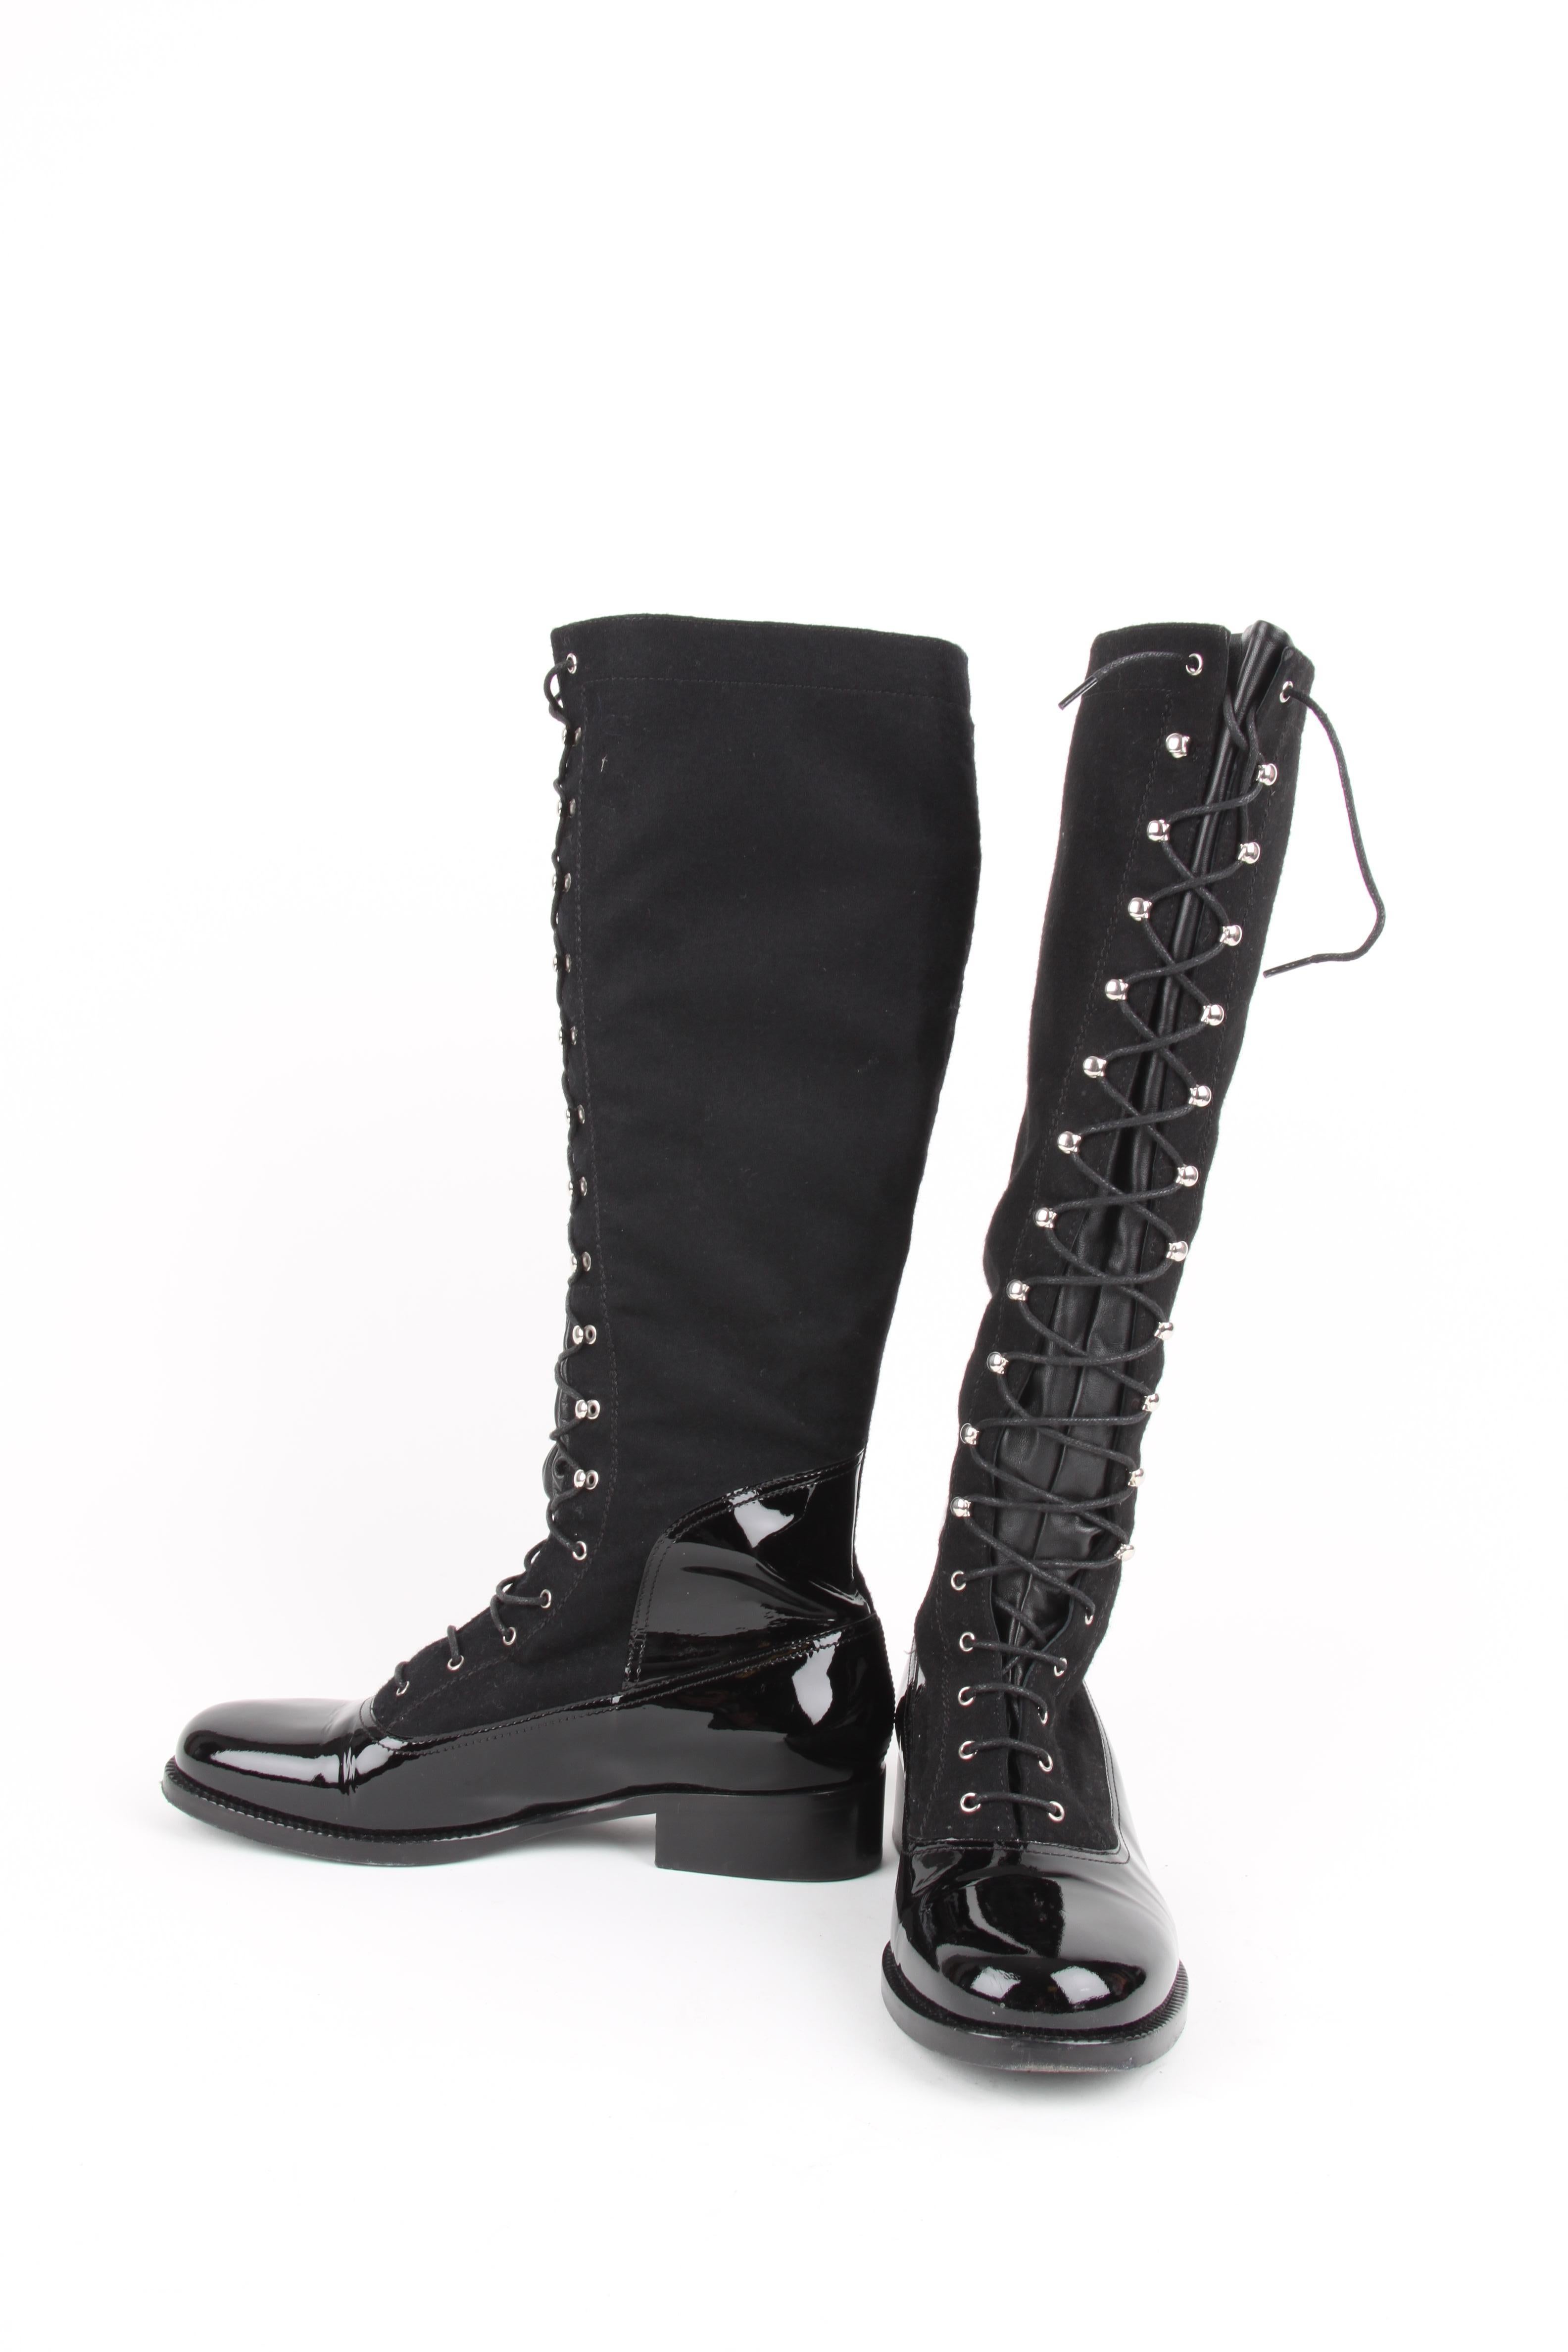 black patent leather knee high boots